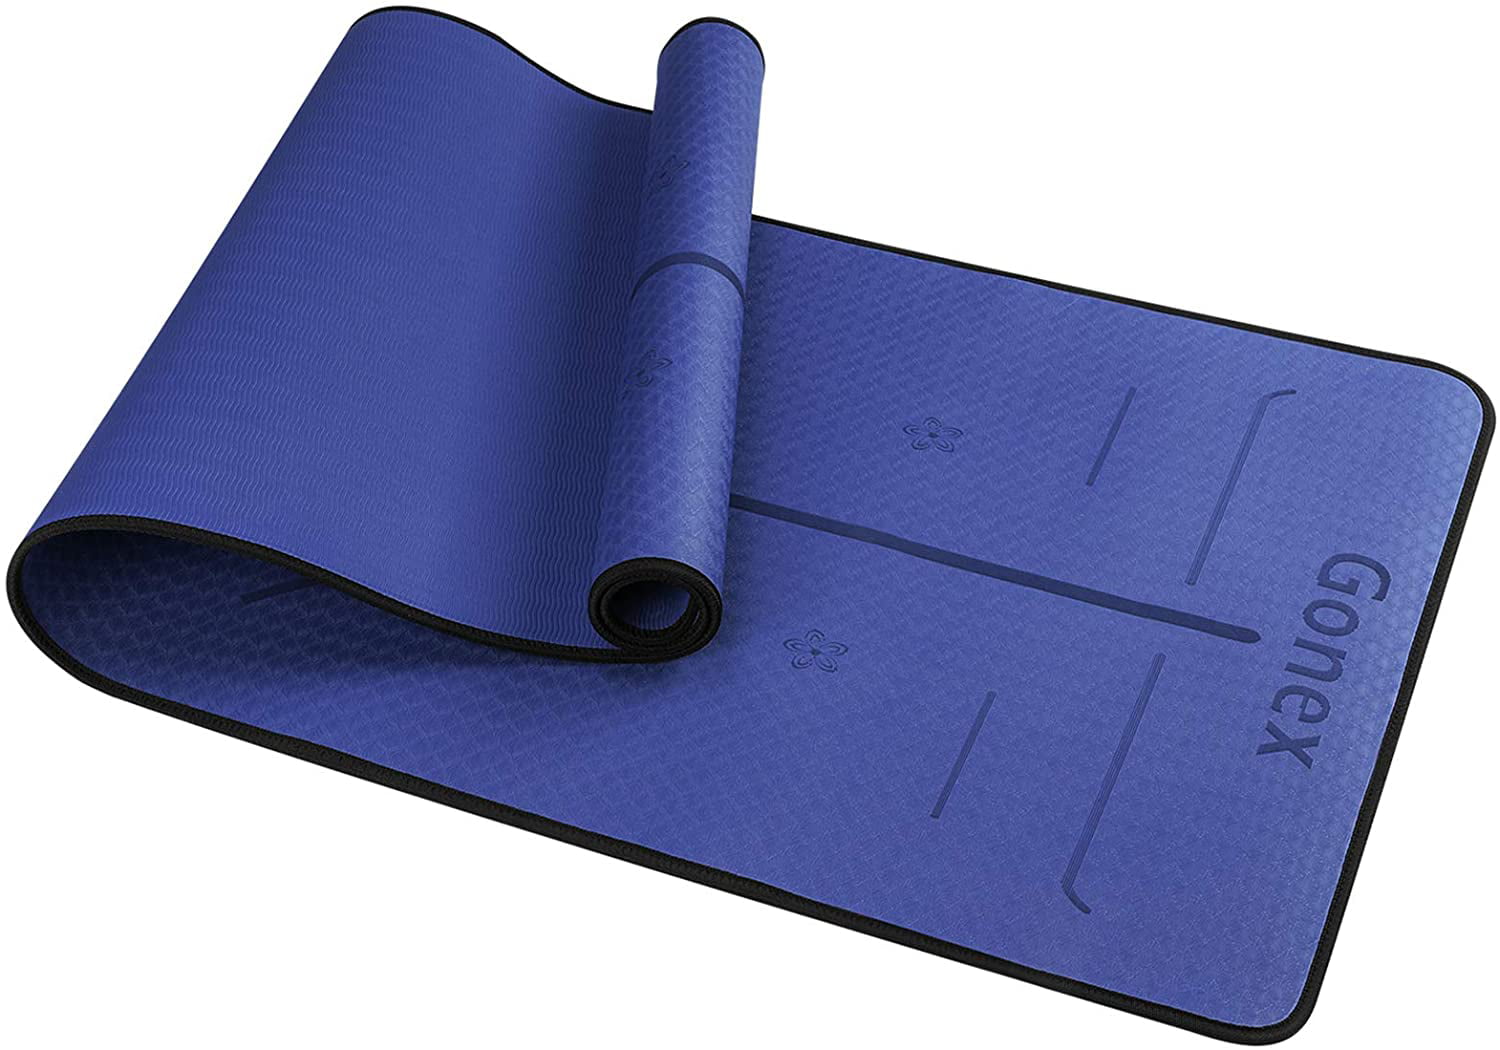 Non toxic Yoga mat Non-slip last technology with lines for each position 